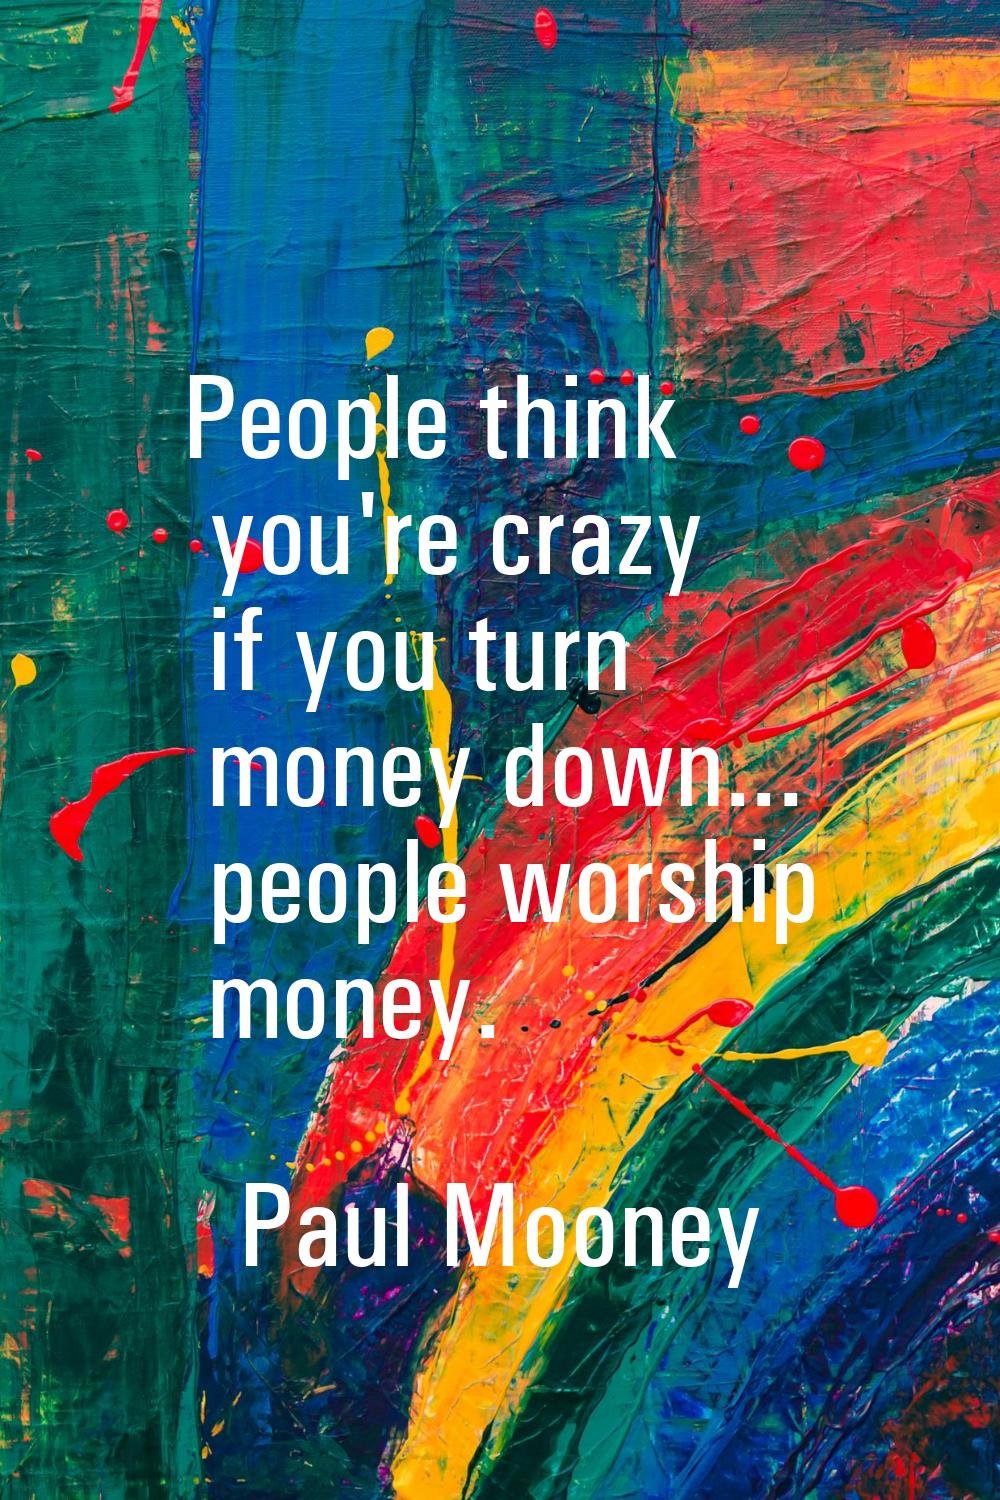 People think you're crazy if you turn money down... people worship money.